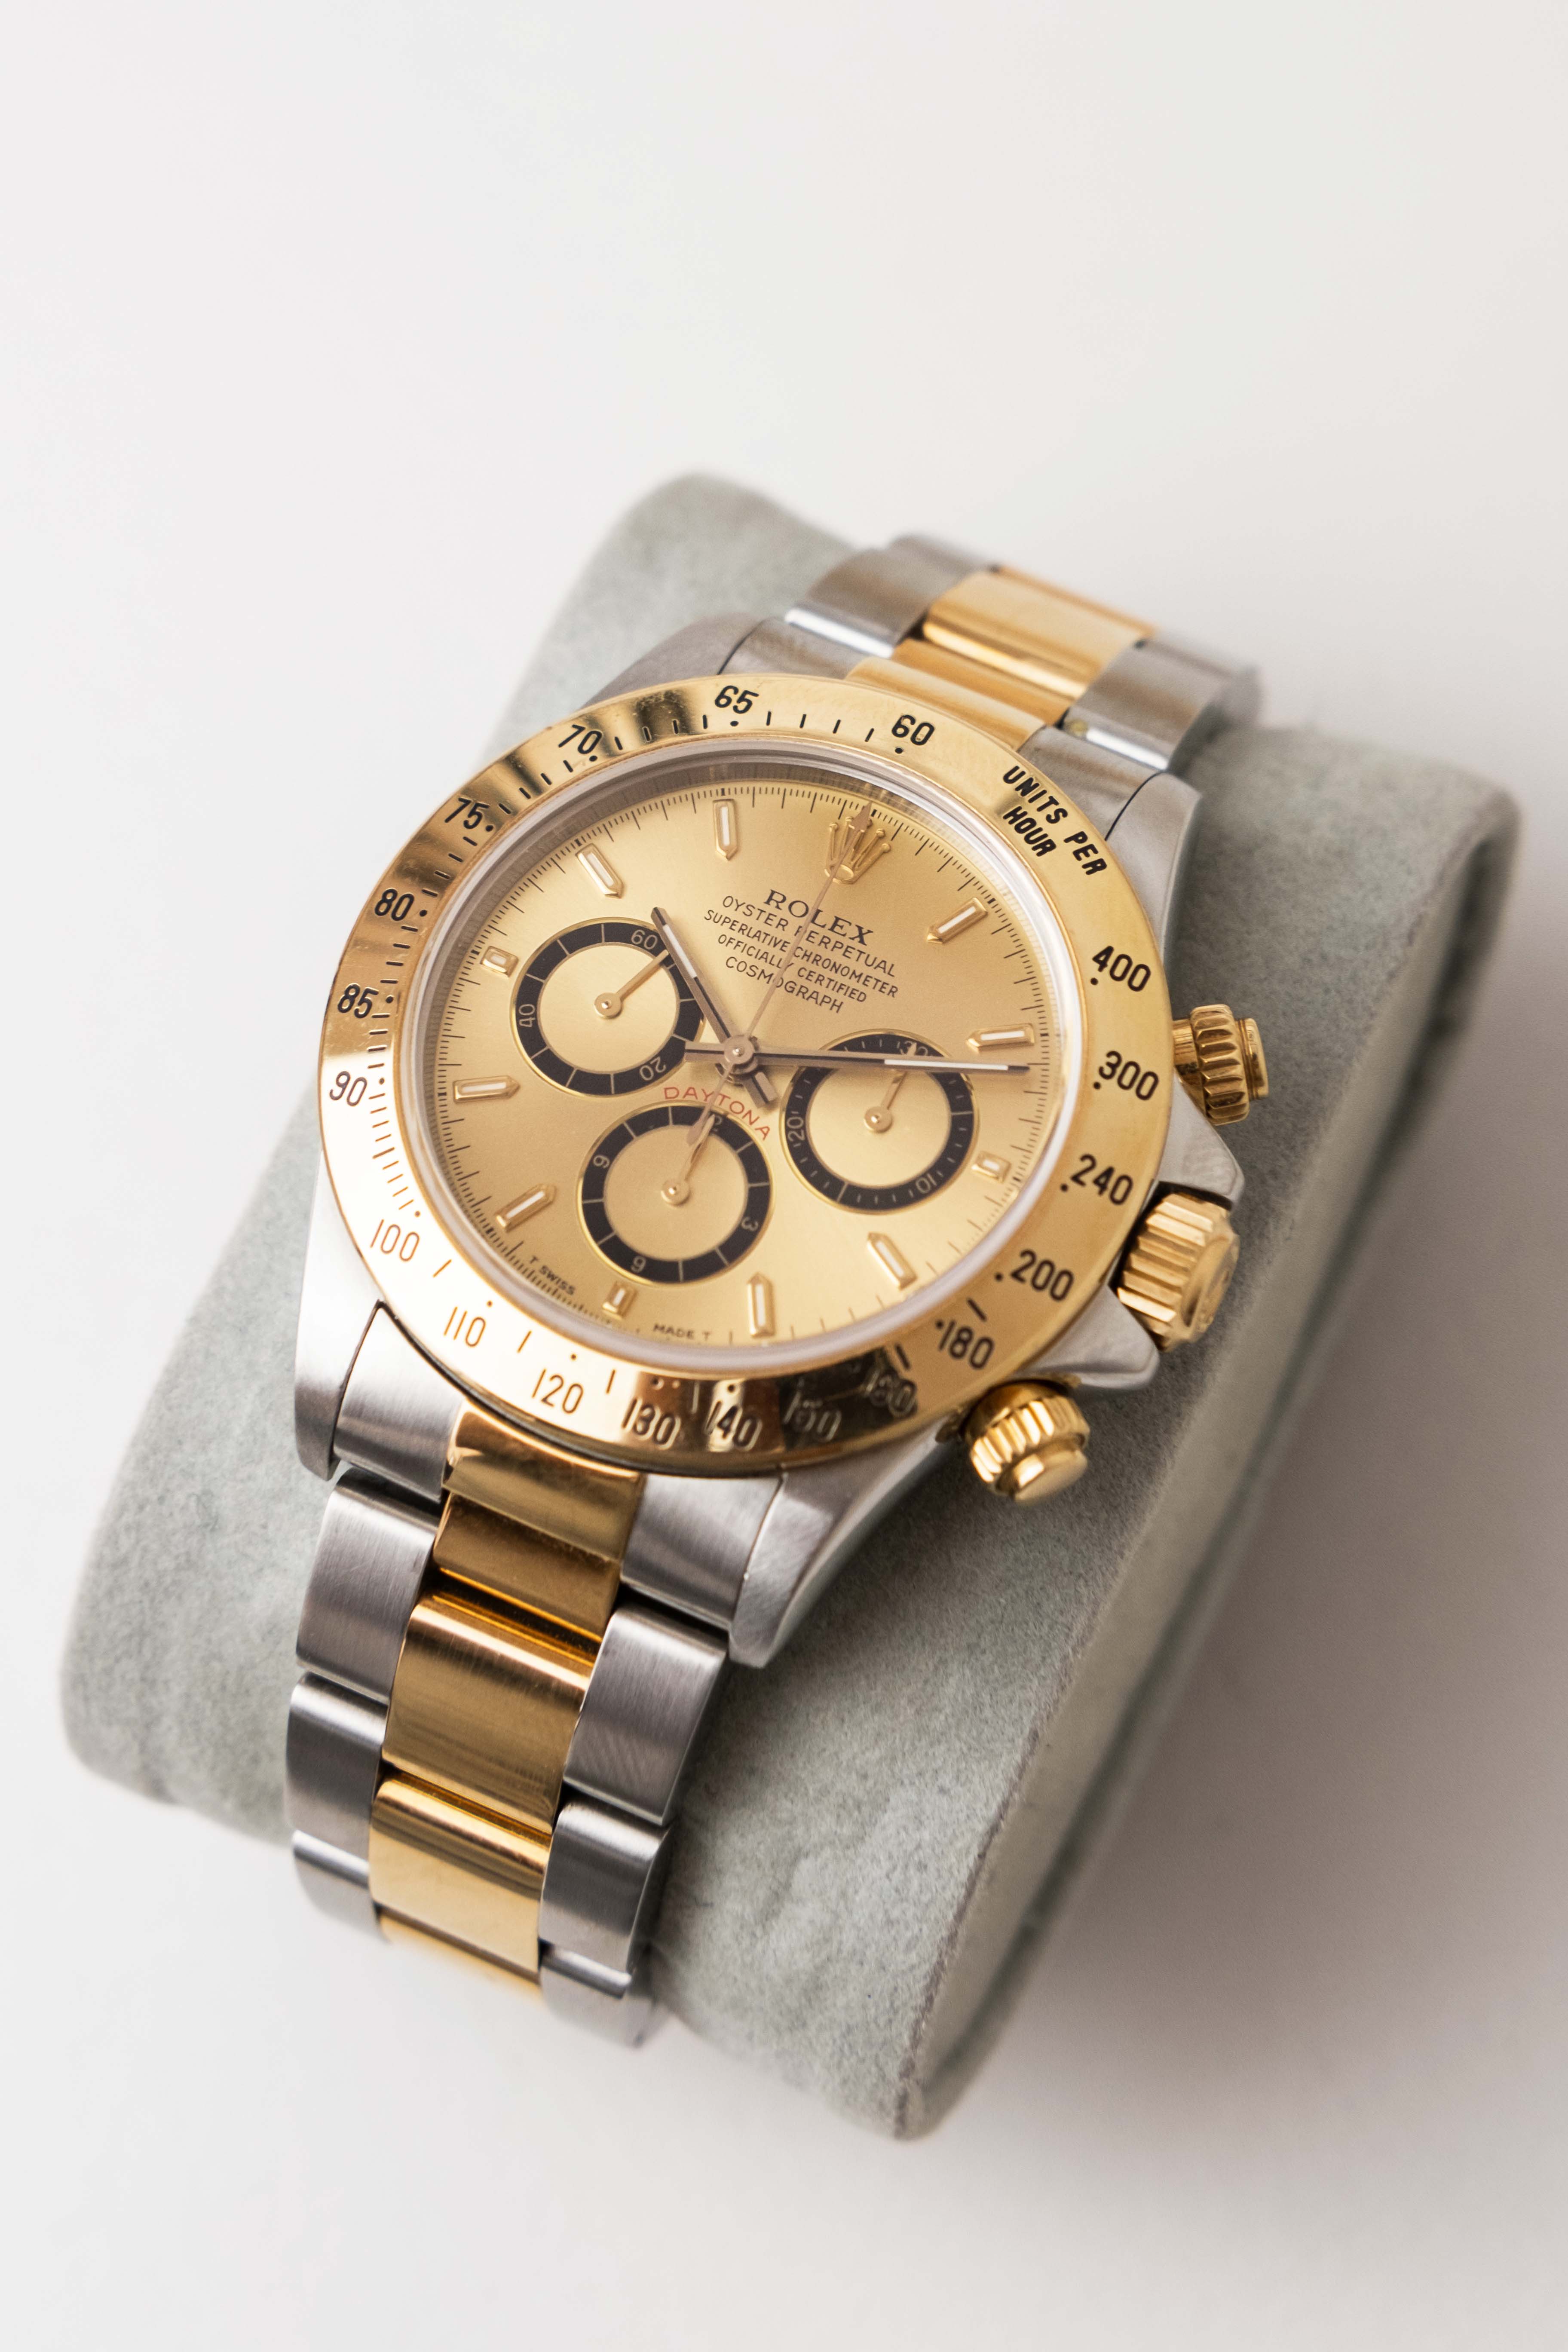 Rolex Daytona Two Tone Zenith Ref. 16523 'Inverted 6’ Dial 1996 w/ Box & Papers